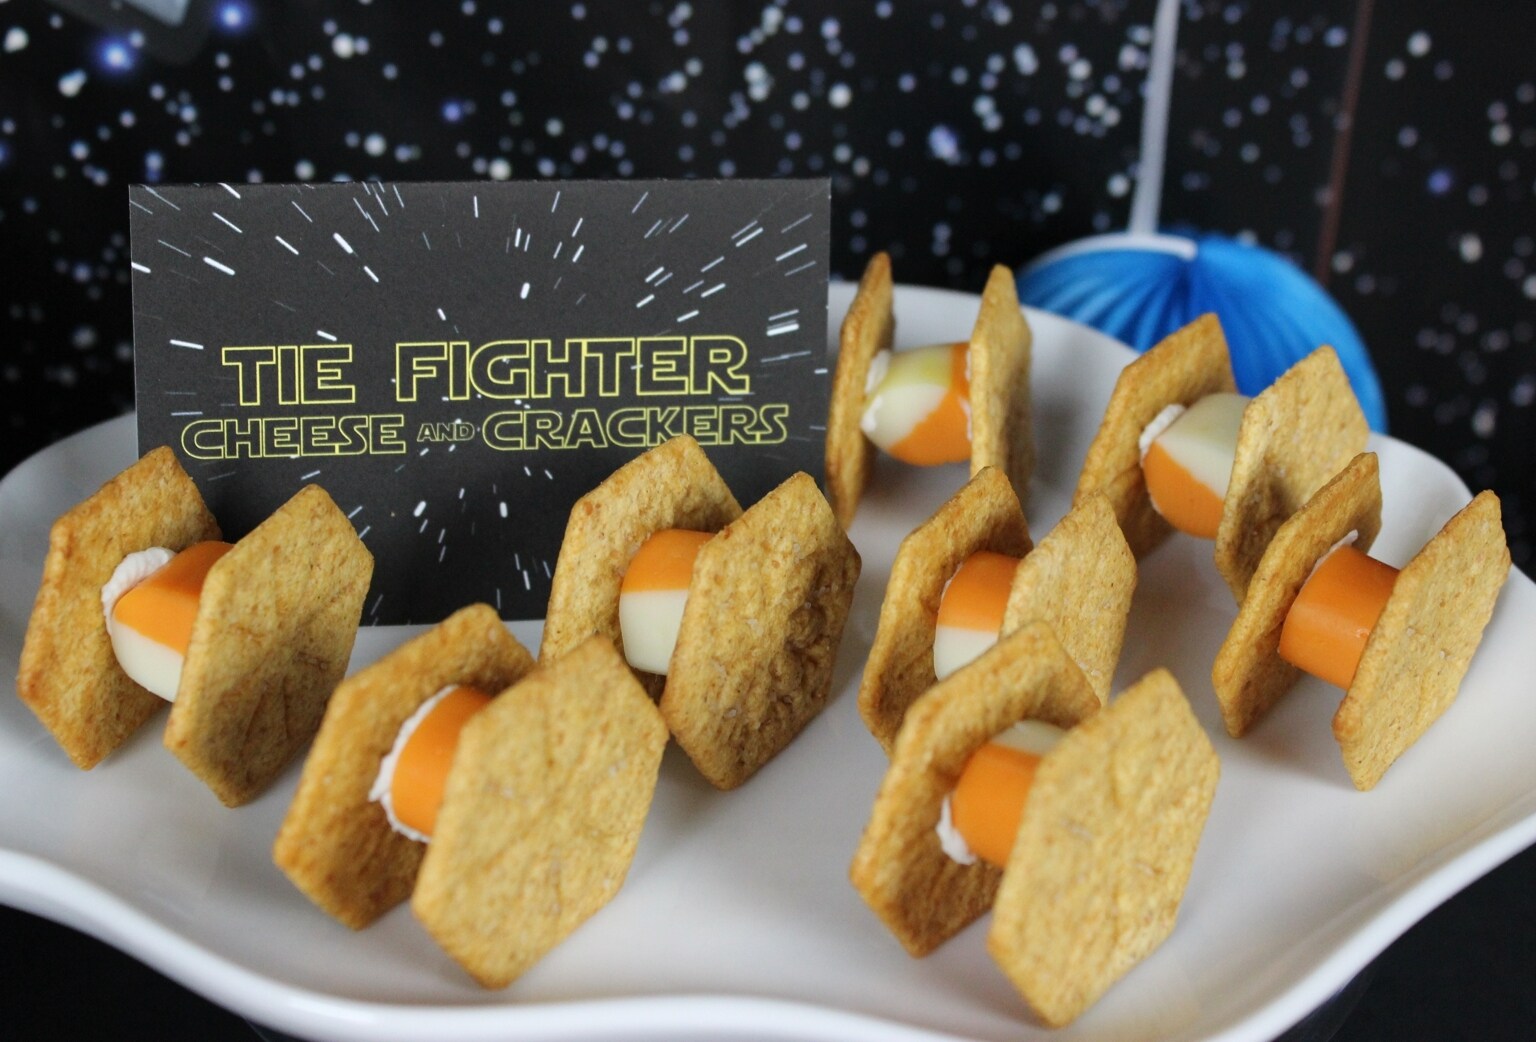 TFA party - TIE Fighter Cheese and Crackers